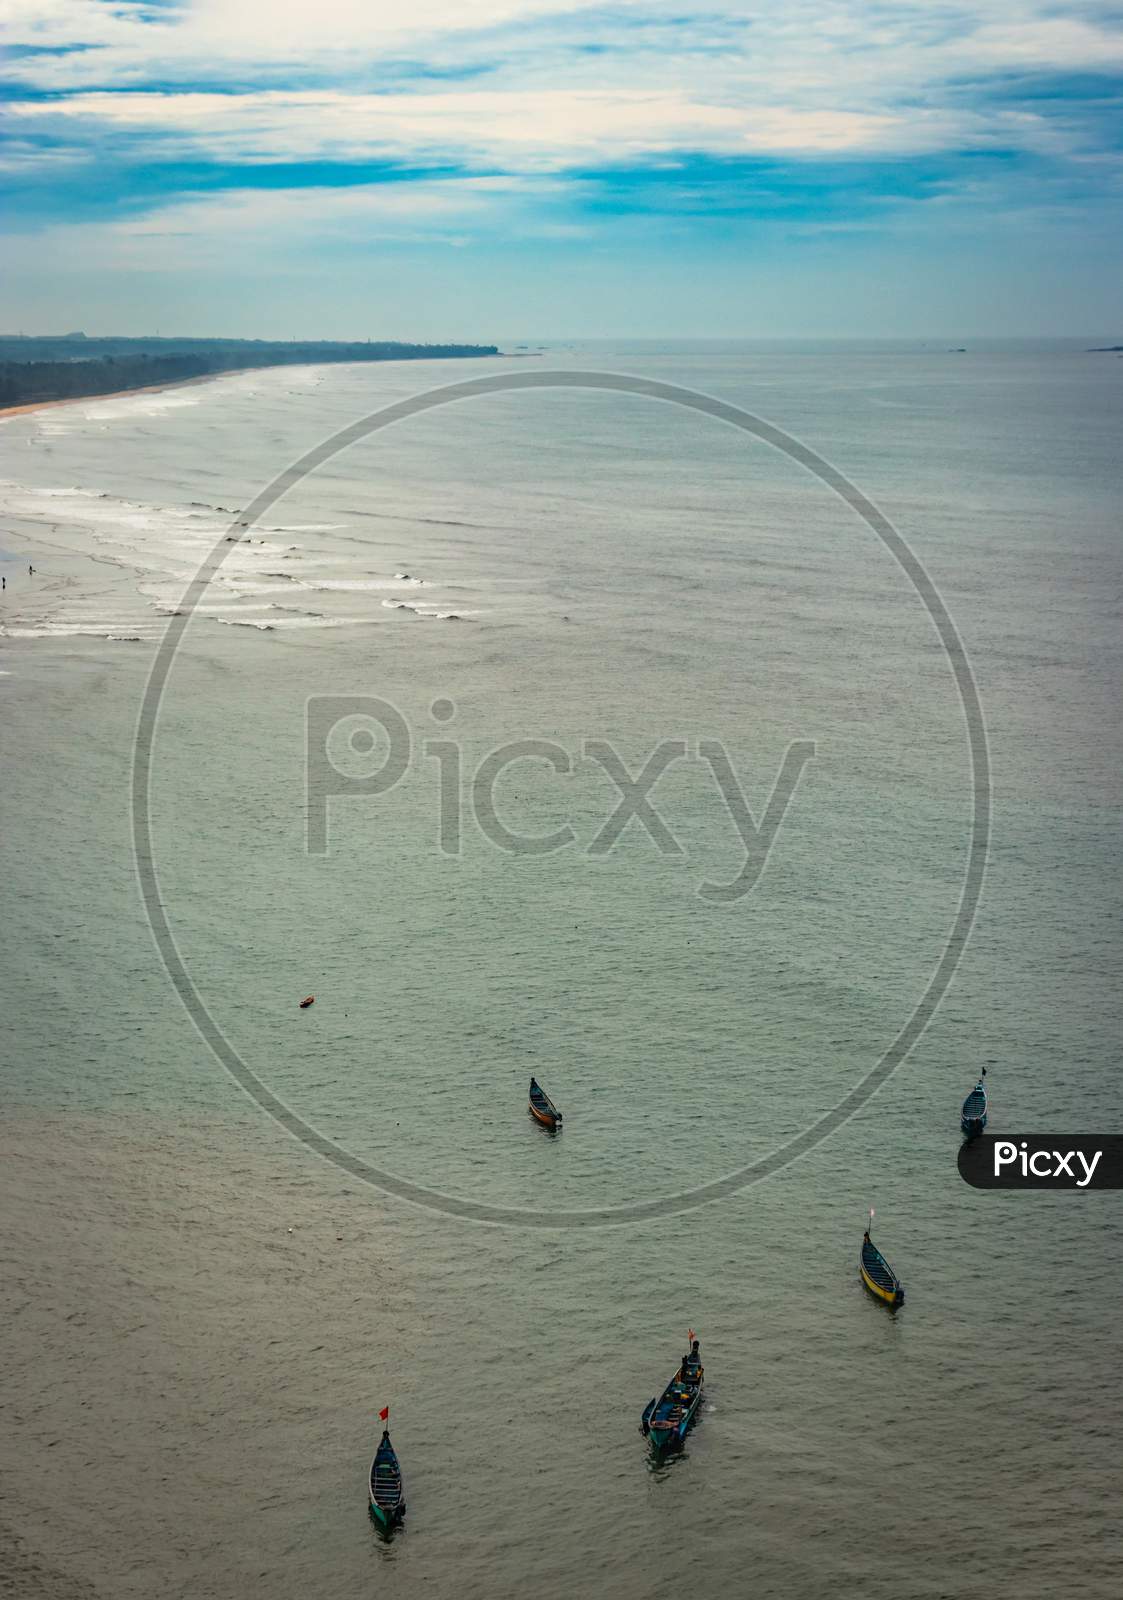 Beach Isolated With Fishing Boats Aerial Shots With Dramatic Sky